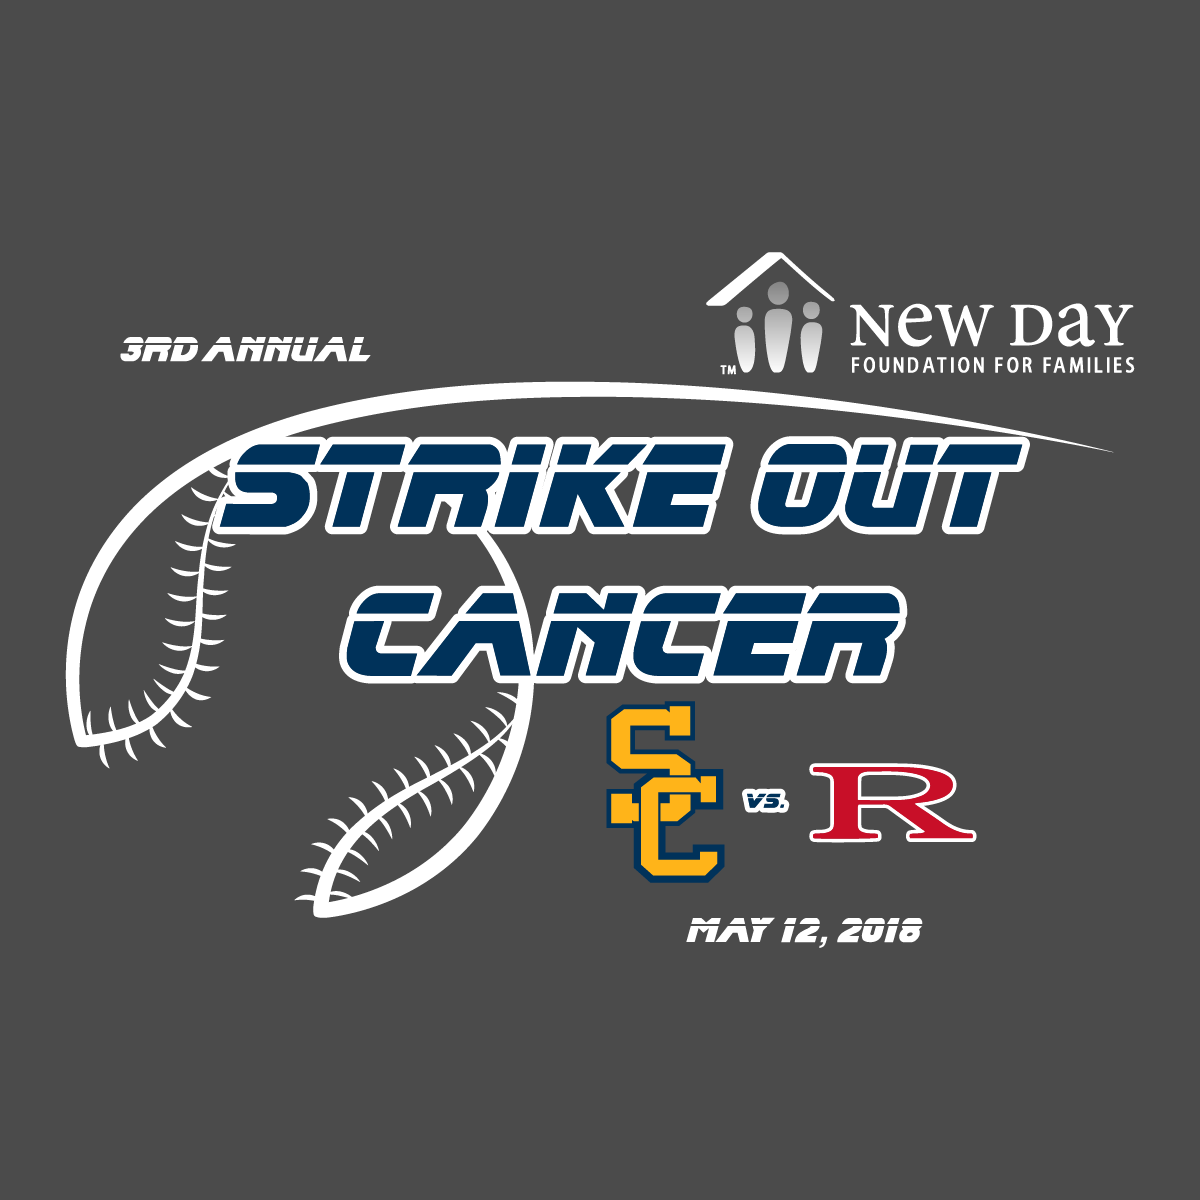 3rd Annual STRIKE OUT CANCER GAME! shirt design - zoomed